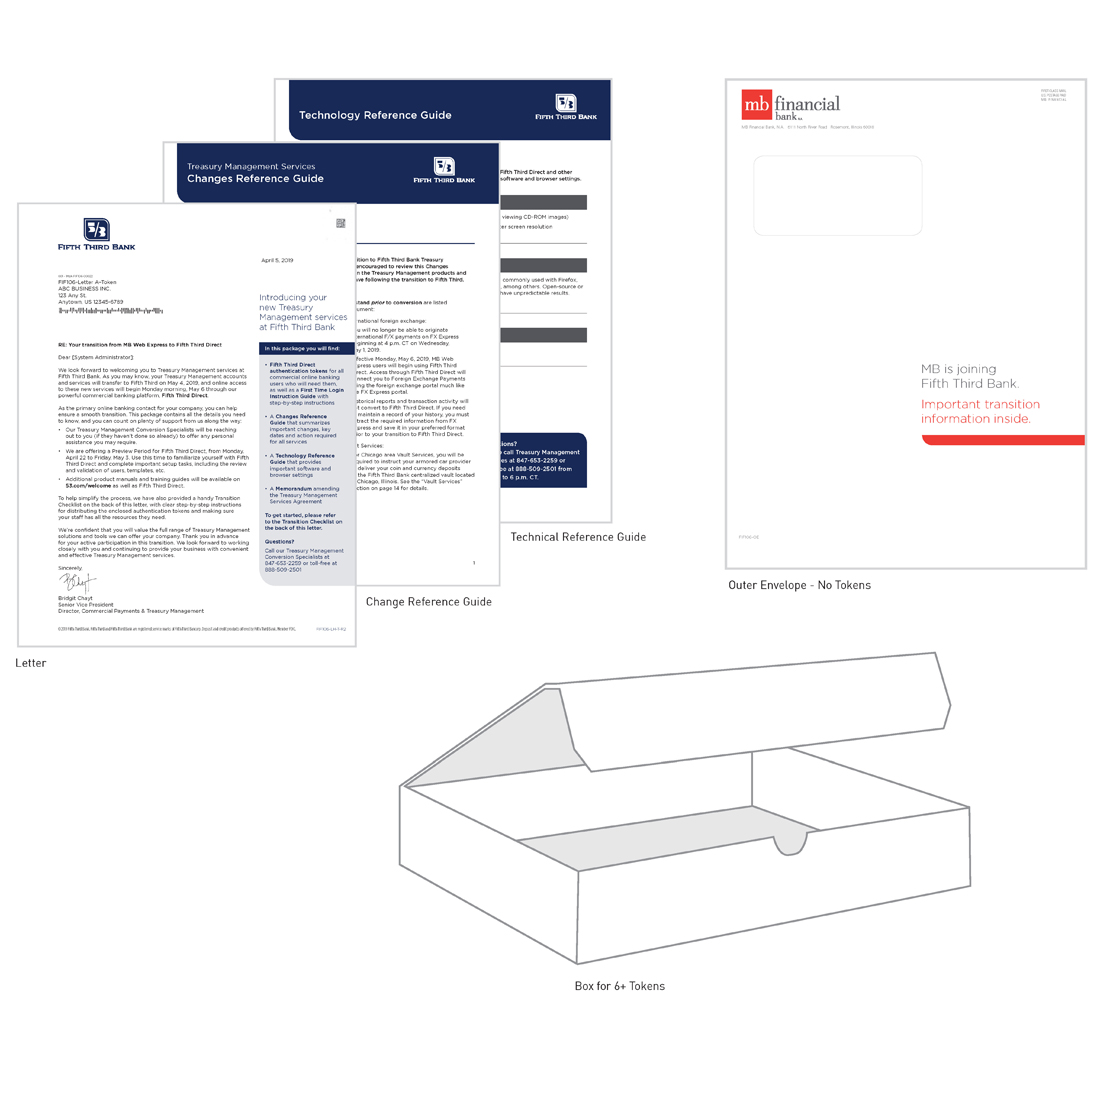 Fifth Third Bank online banking mailing letter, change and technical reference guides, outer envelope example of no-token package, and example of box for packages with more than 6 tokens